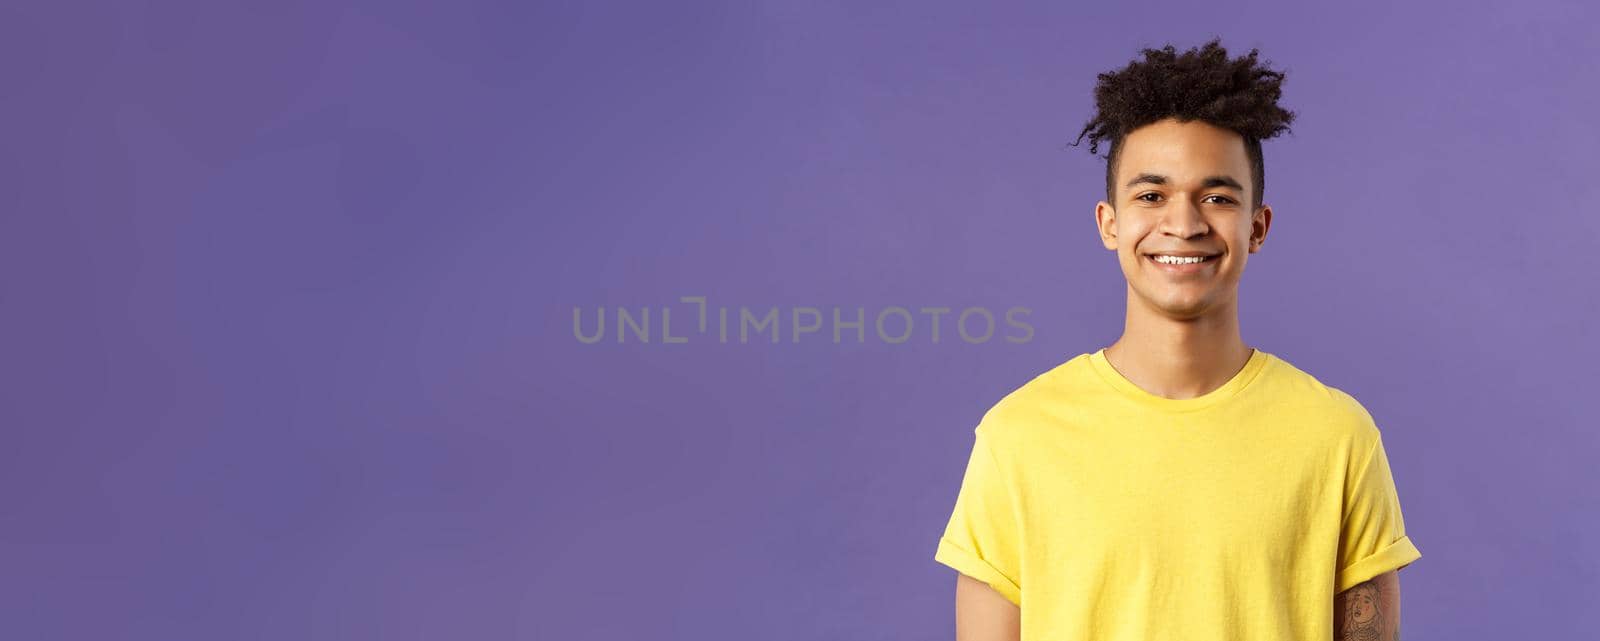 Close-up portrait of nice, friendly-looking hispanic male student in yellow t-shirt, grinning delighted, look upbeat happy and positive, standing enthusiastic with beaming smile purple background by Benzoix